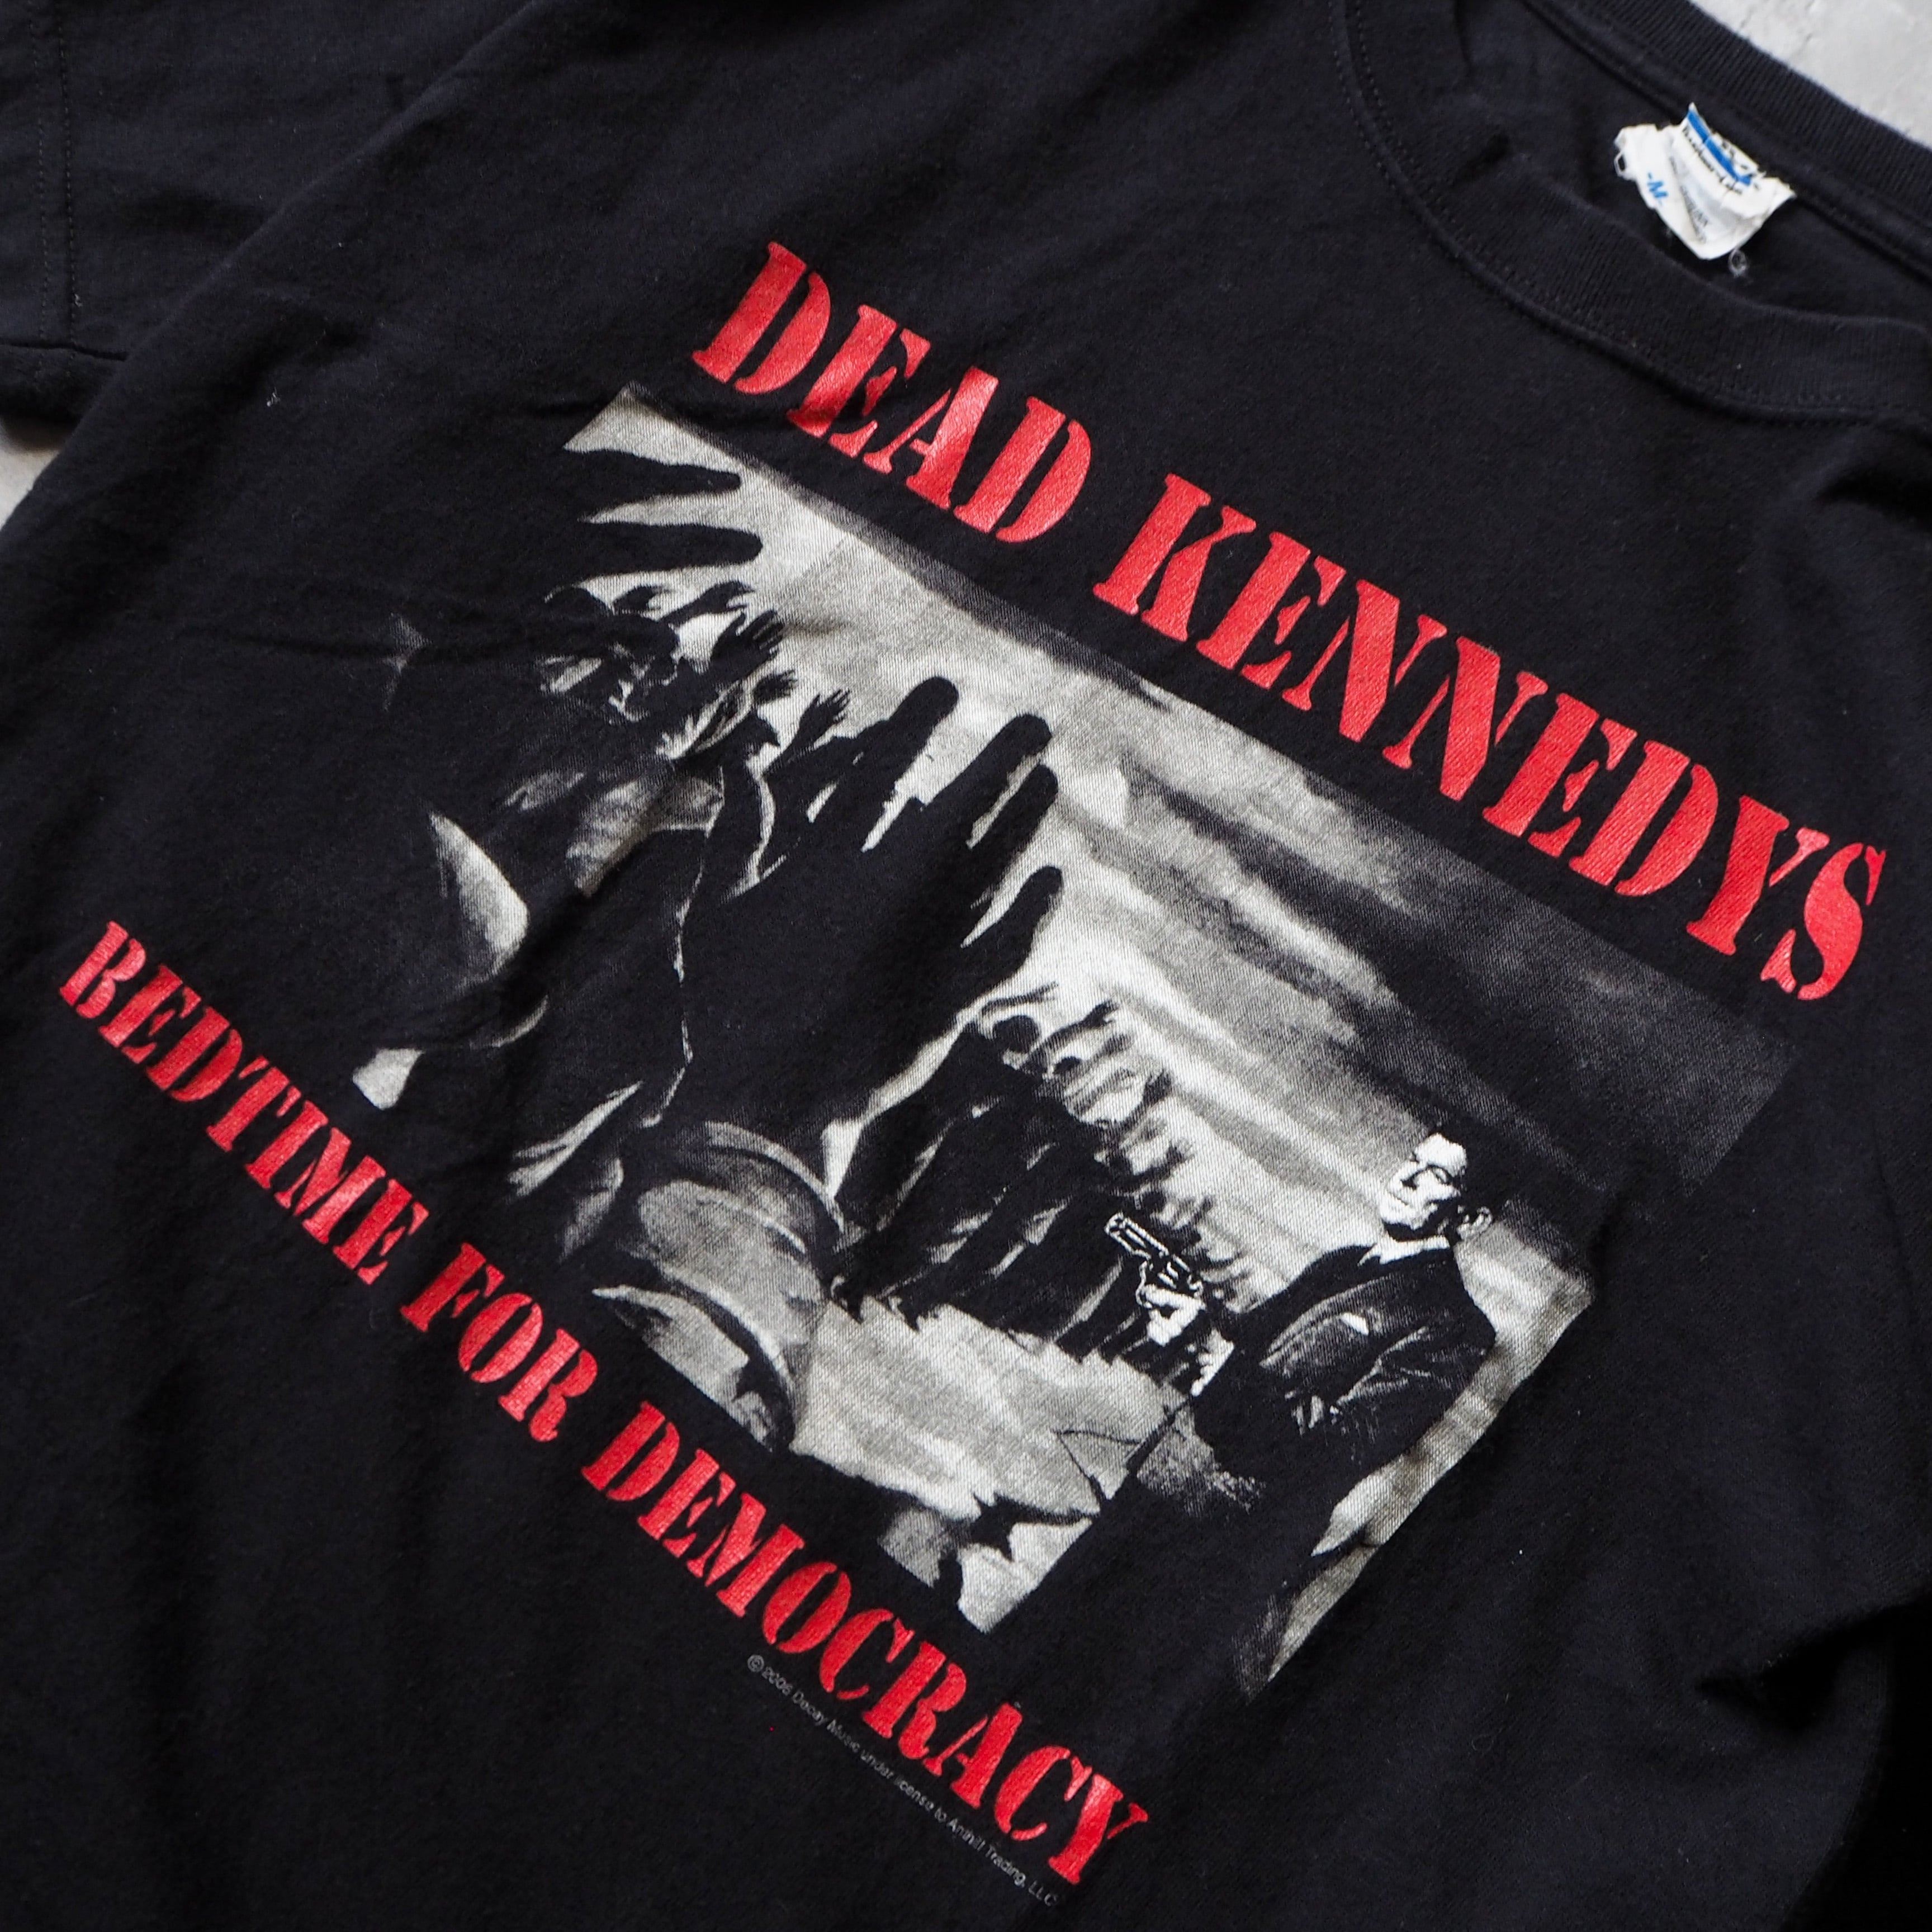 00s “DEAD KENNEDYS” bedtime for democracy band tee 00年代 デッド ...